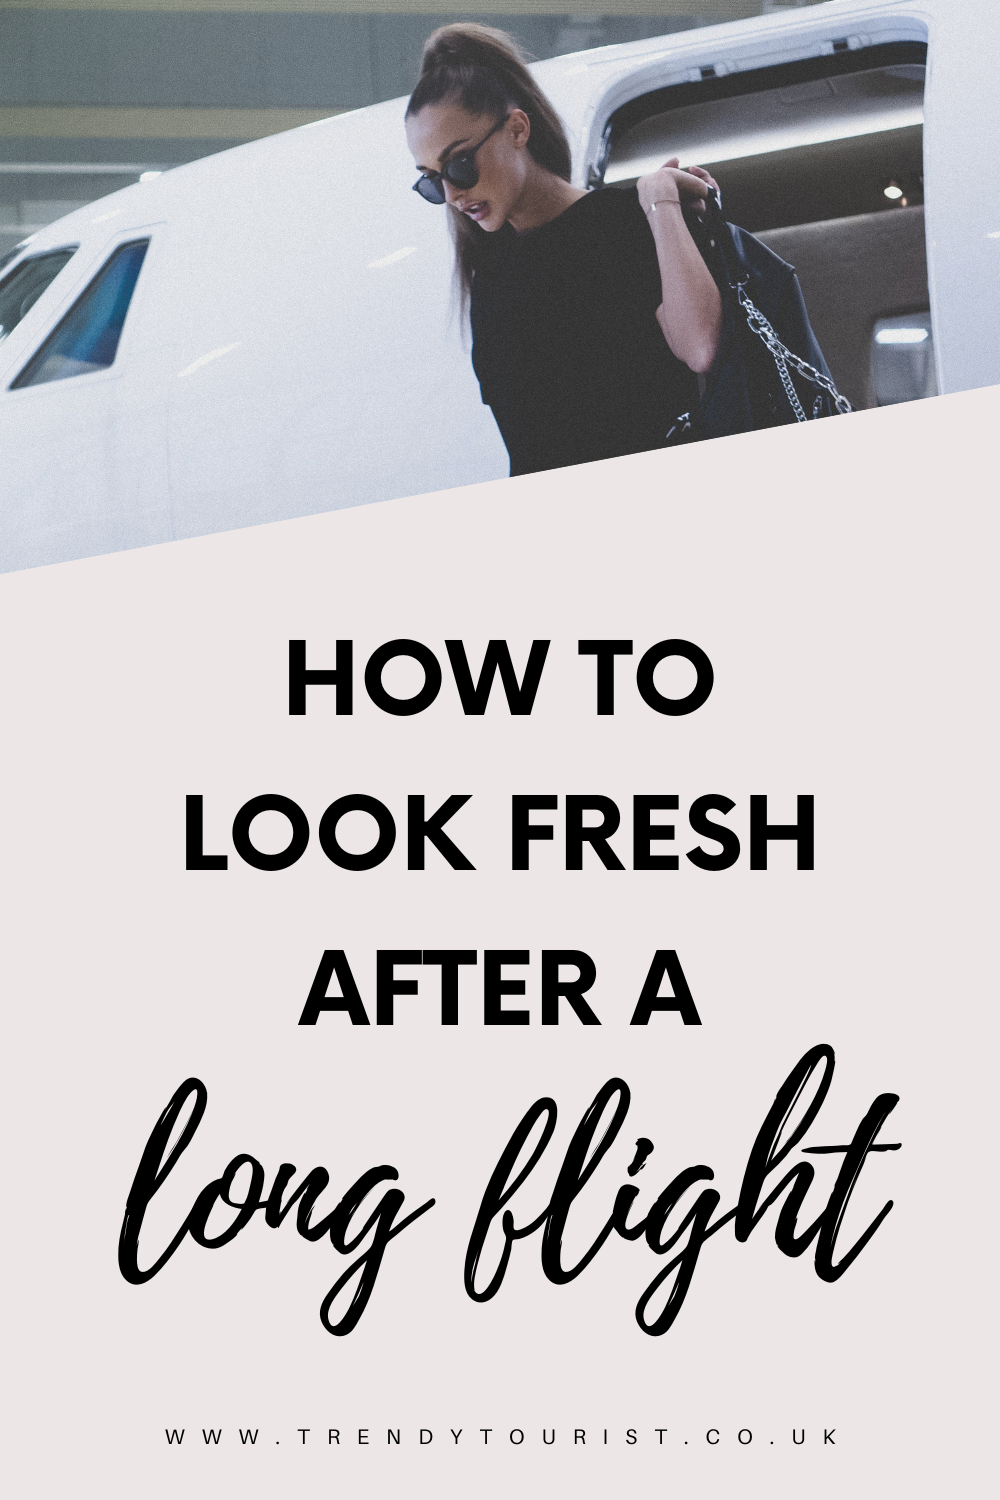 How to Look Fresh After a Long Flight